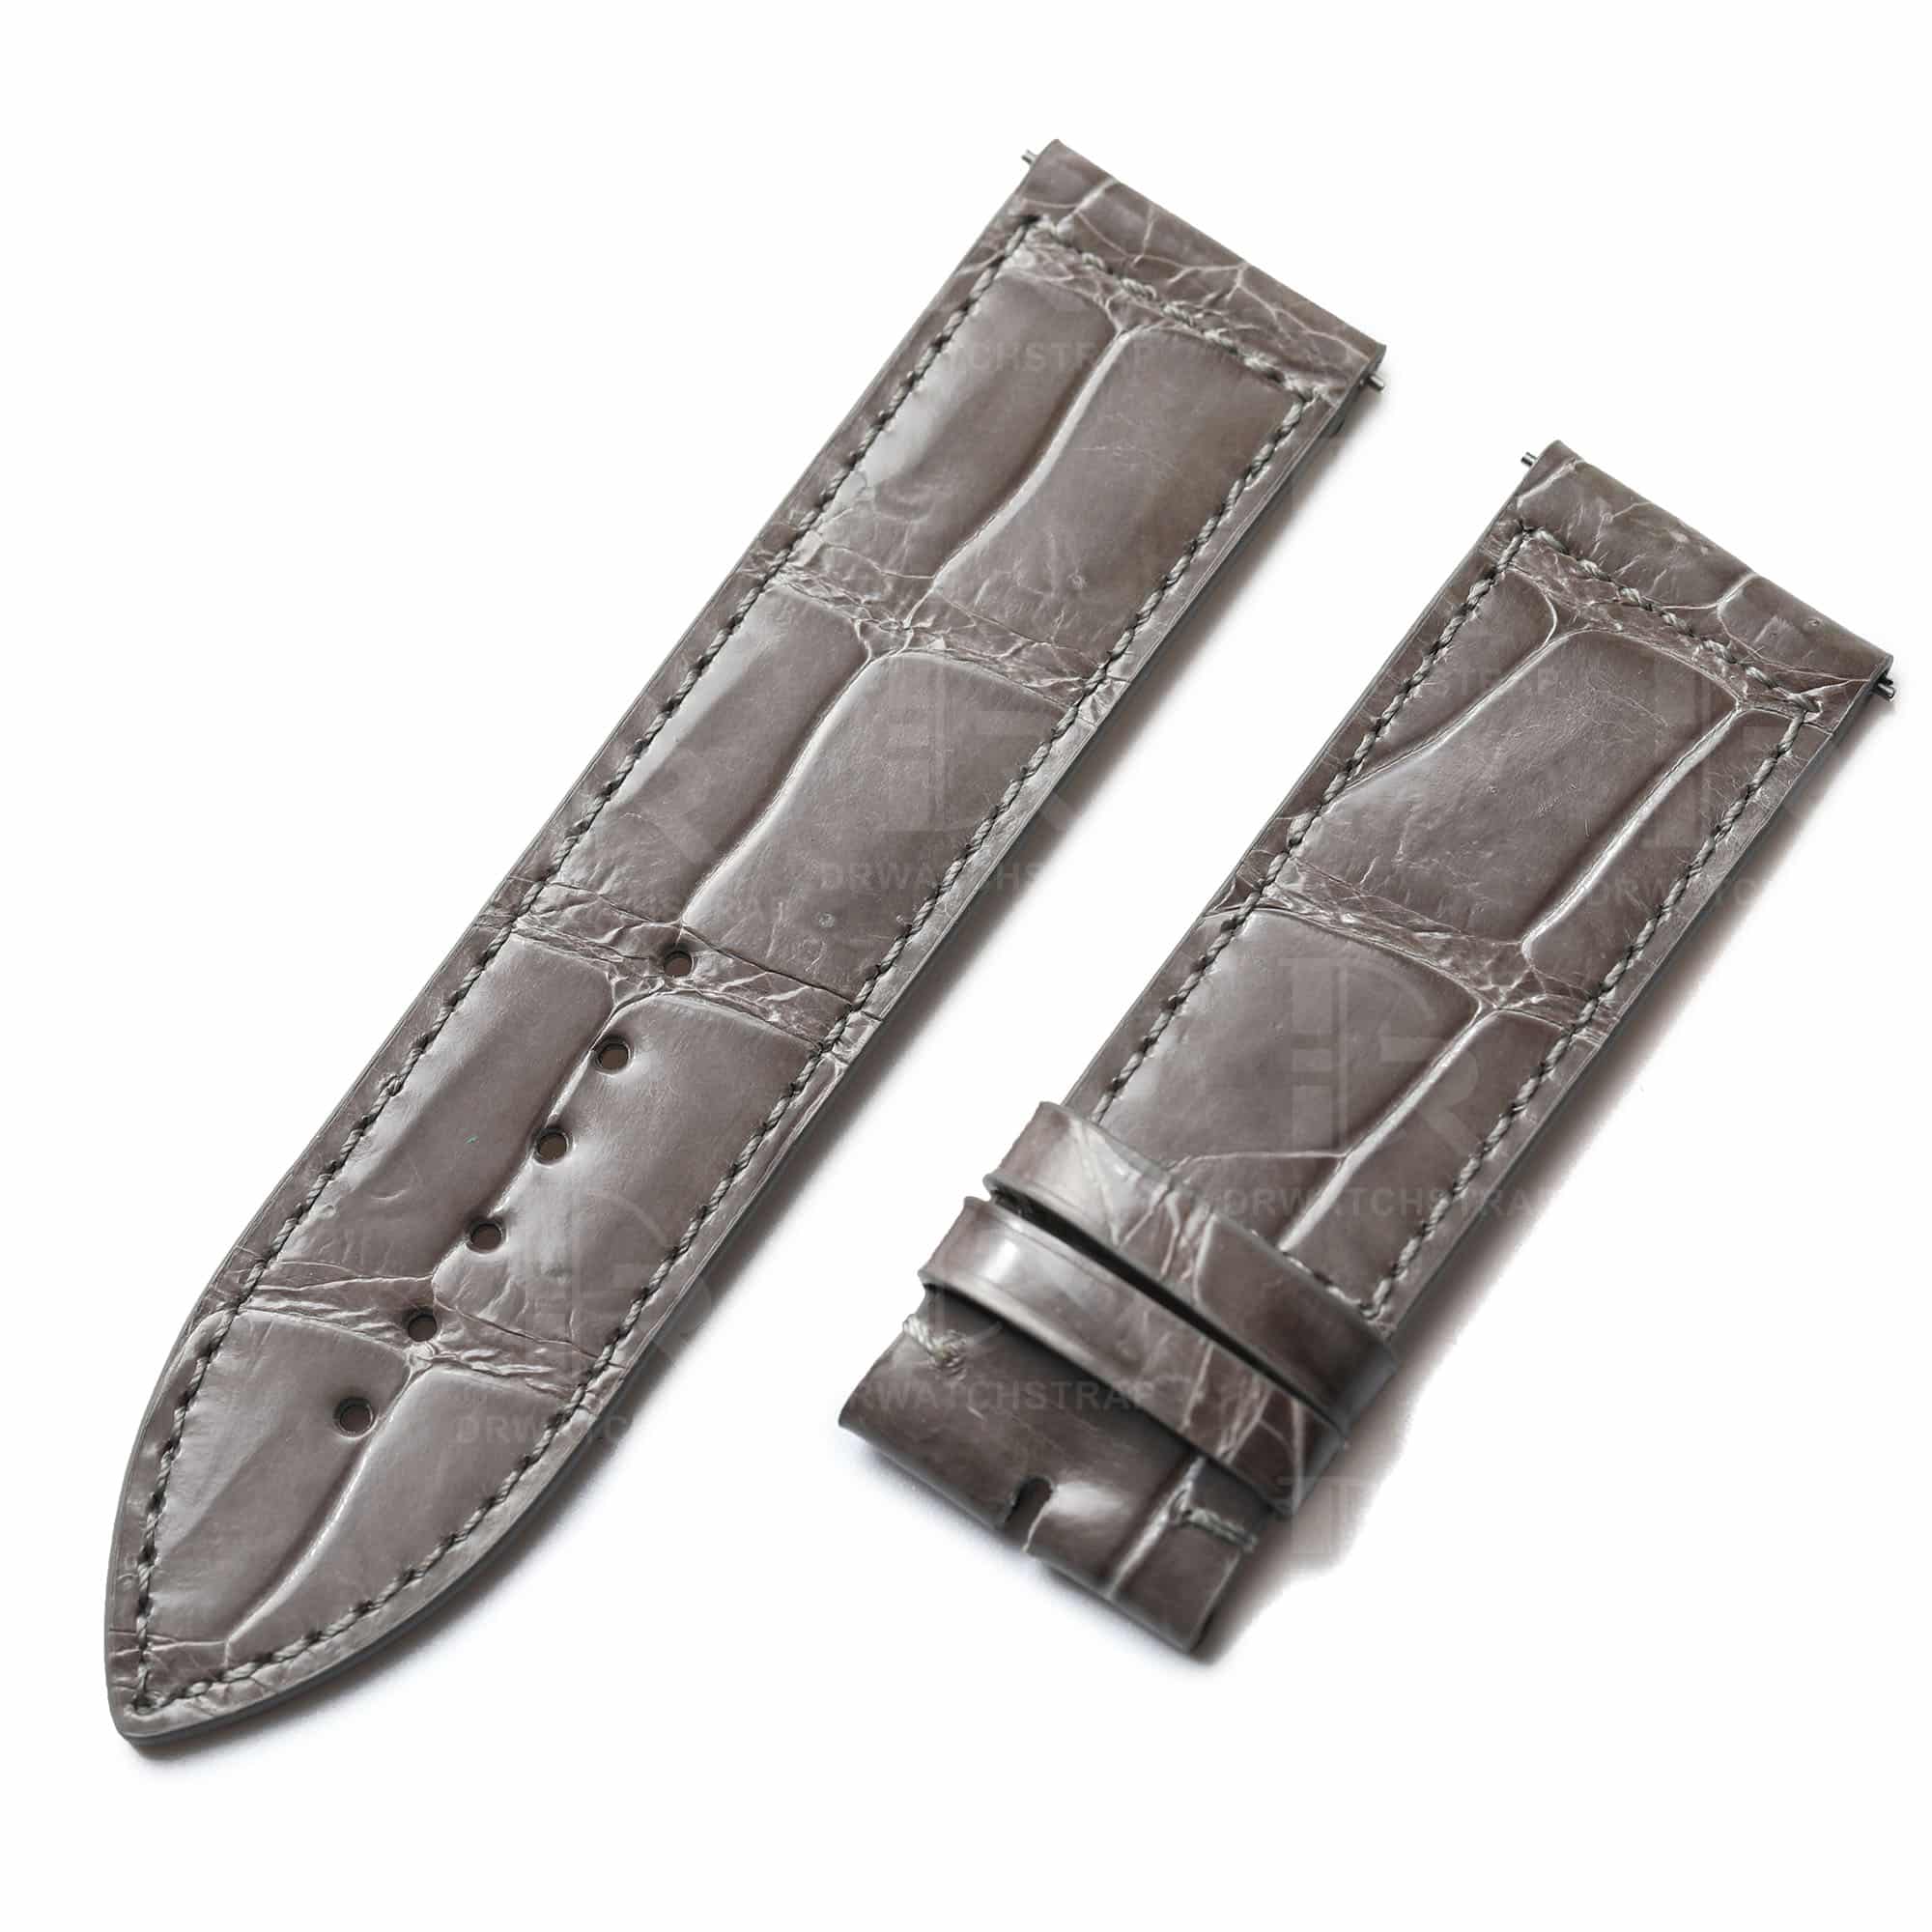 Custom handmade best quality grade A American crocodile 26mm Grey leather alligator strap and watch band replacement fit for Franck Muller Master Square 6000 h SC DT luxury watches online - High-end leather straps 100% hand stitched for sale